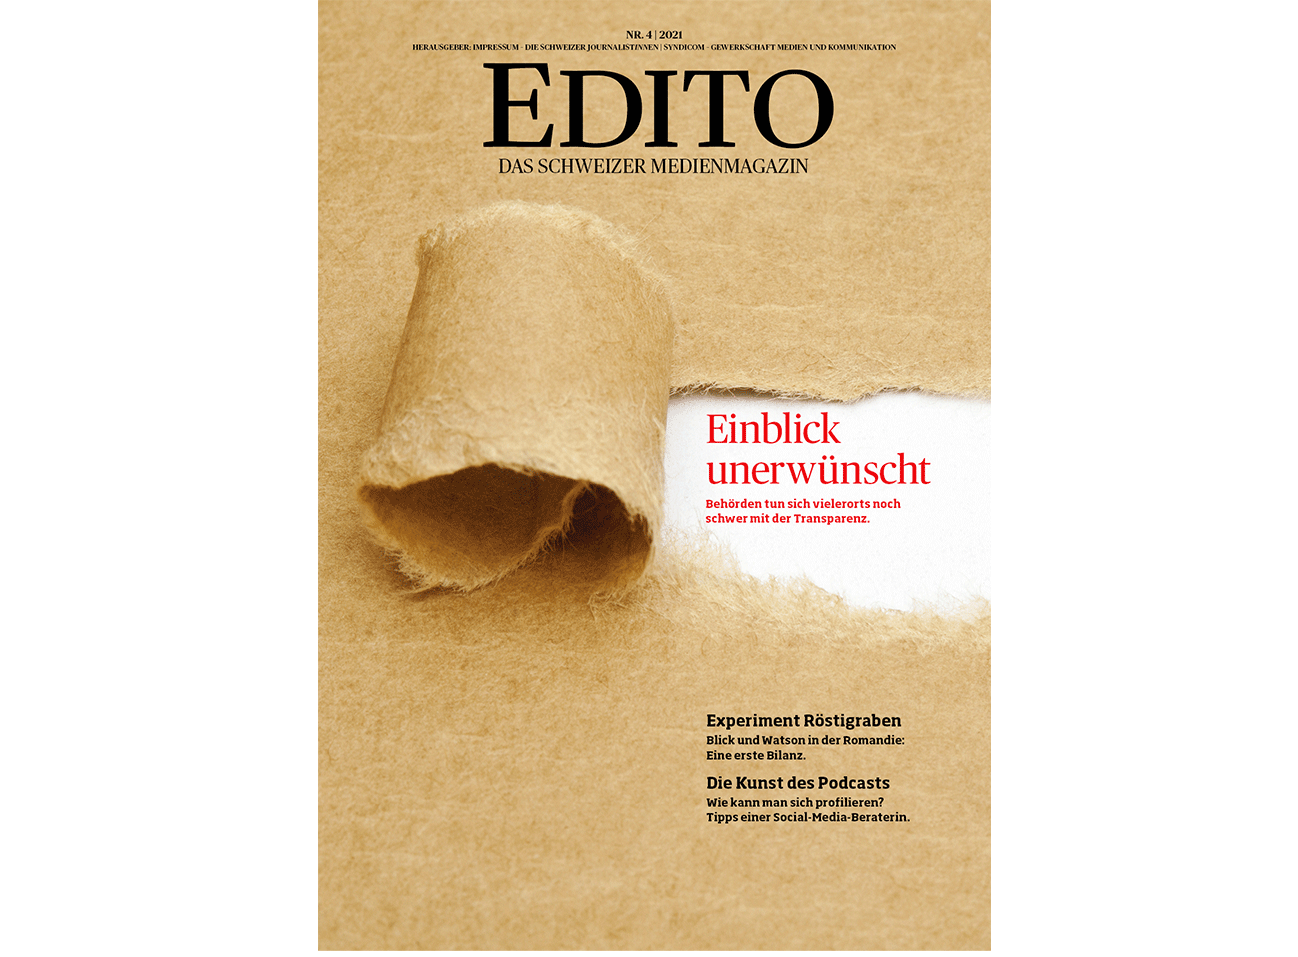 Edito-overview-Cover-galledia-fachmedien-referenzen.png